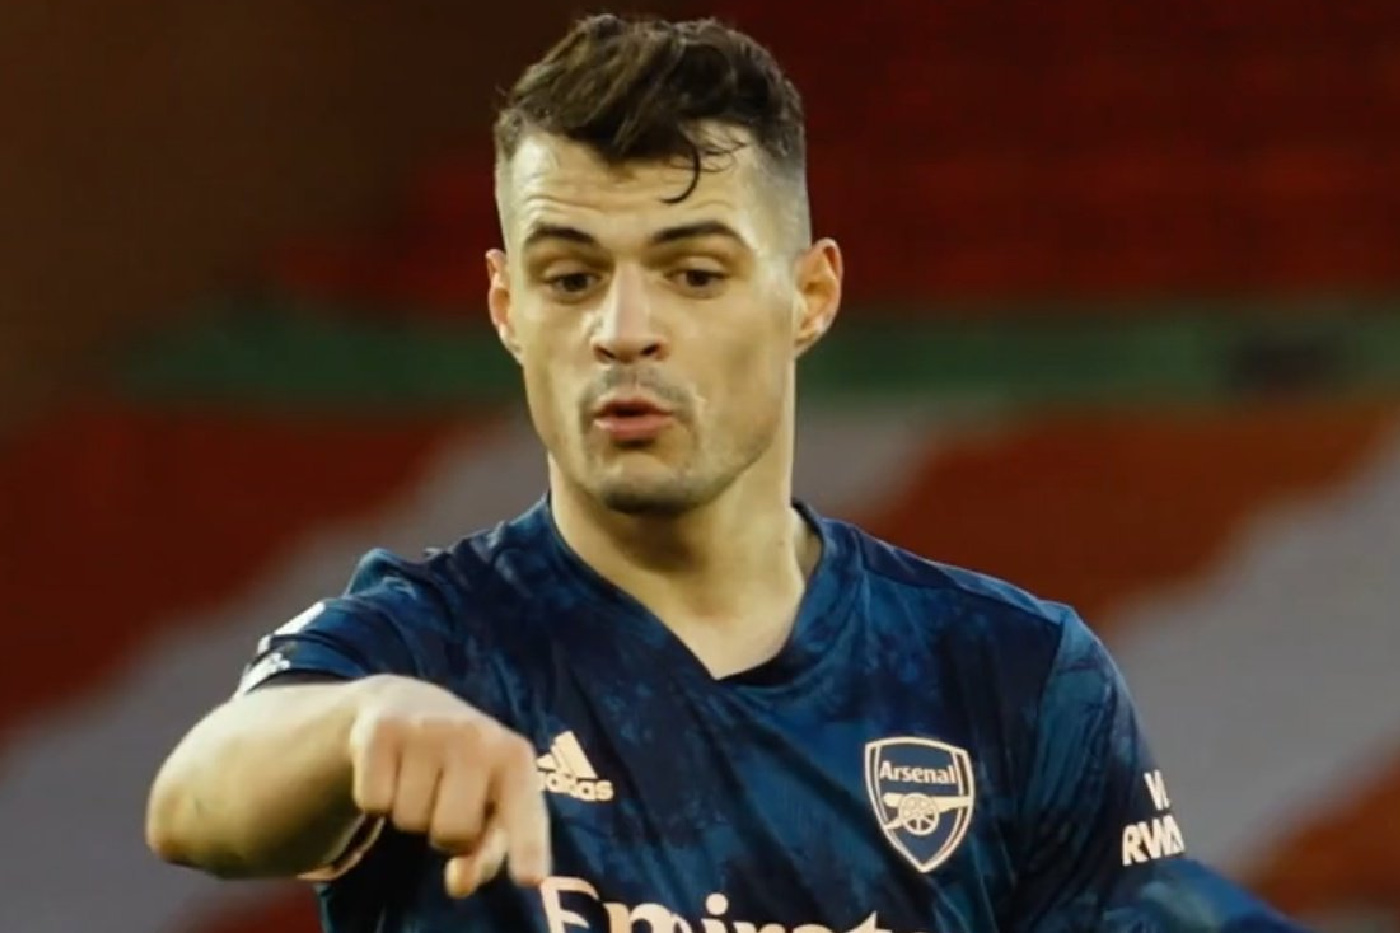 Video: Granit Xhaka continues to remain Arsenal’s captain, even without the armband